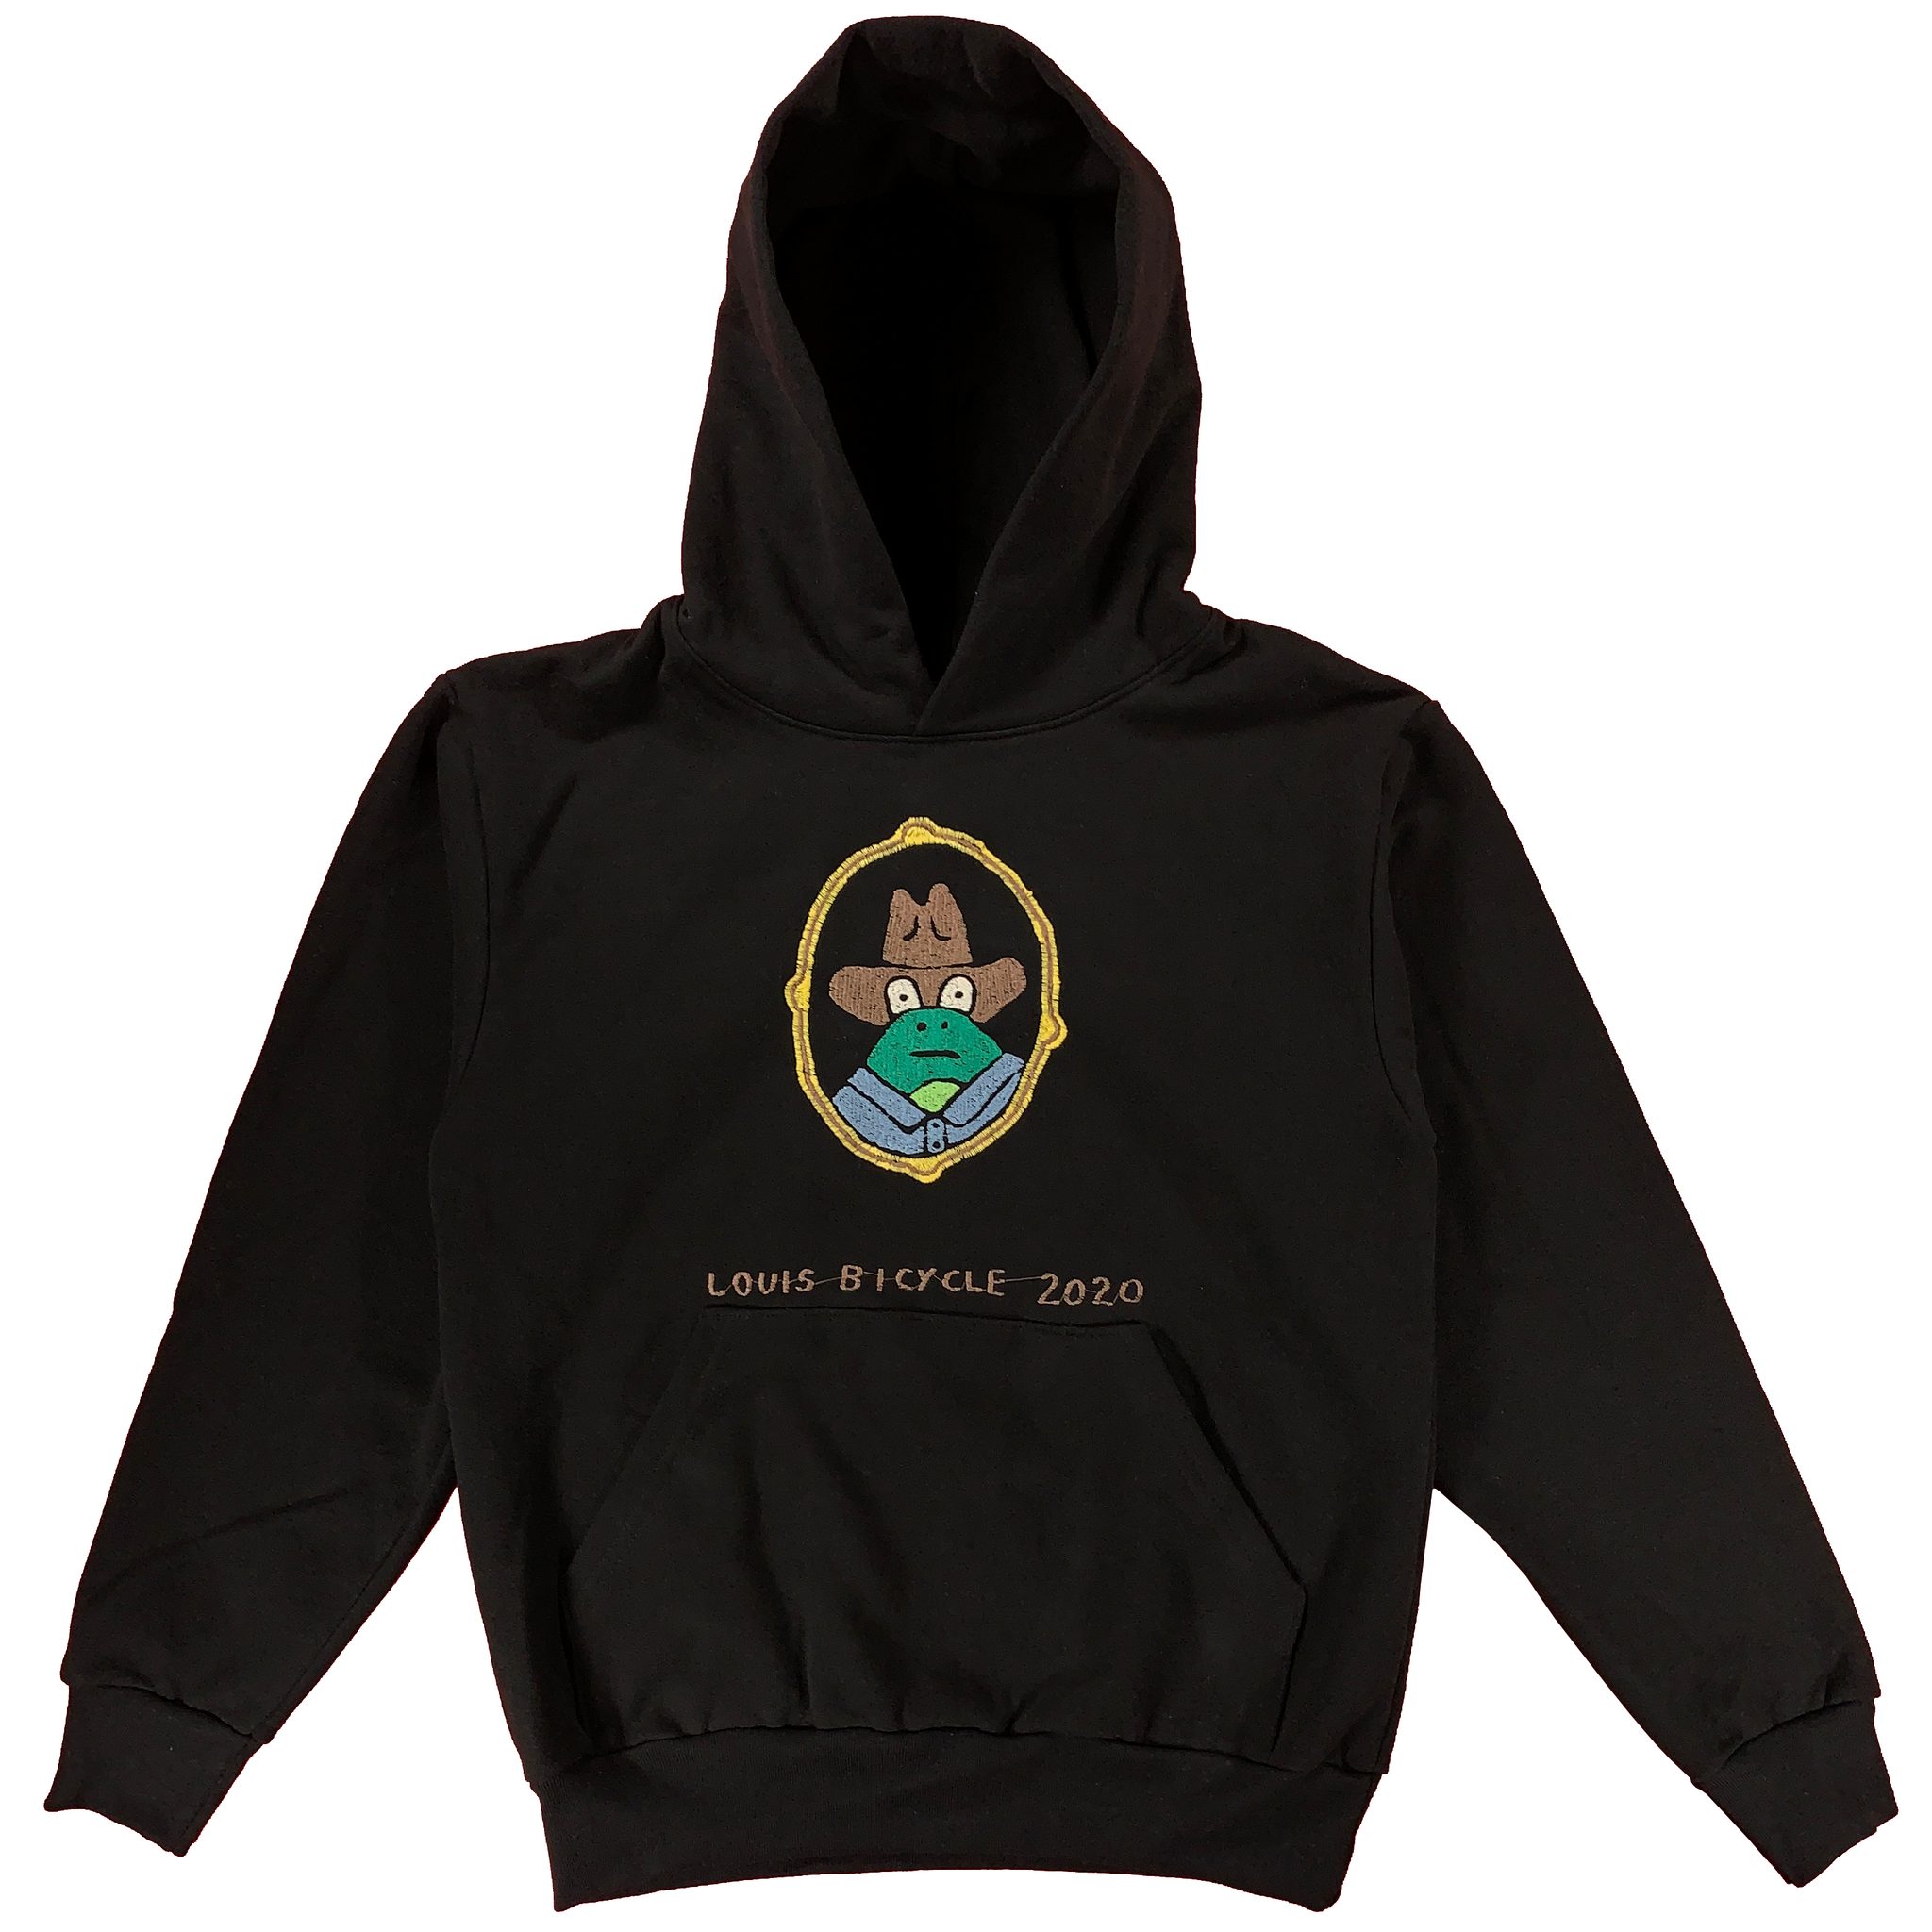 Embroidered Hoodie - Small